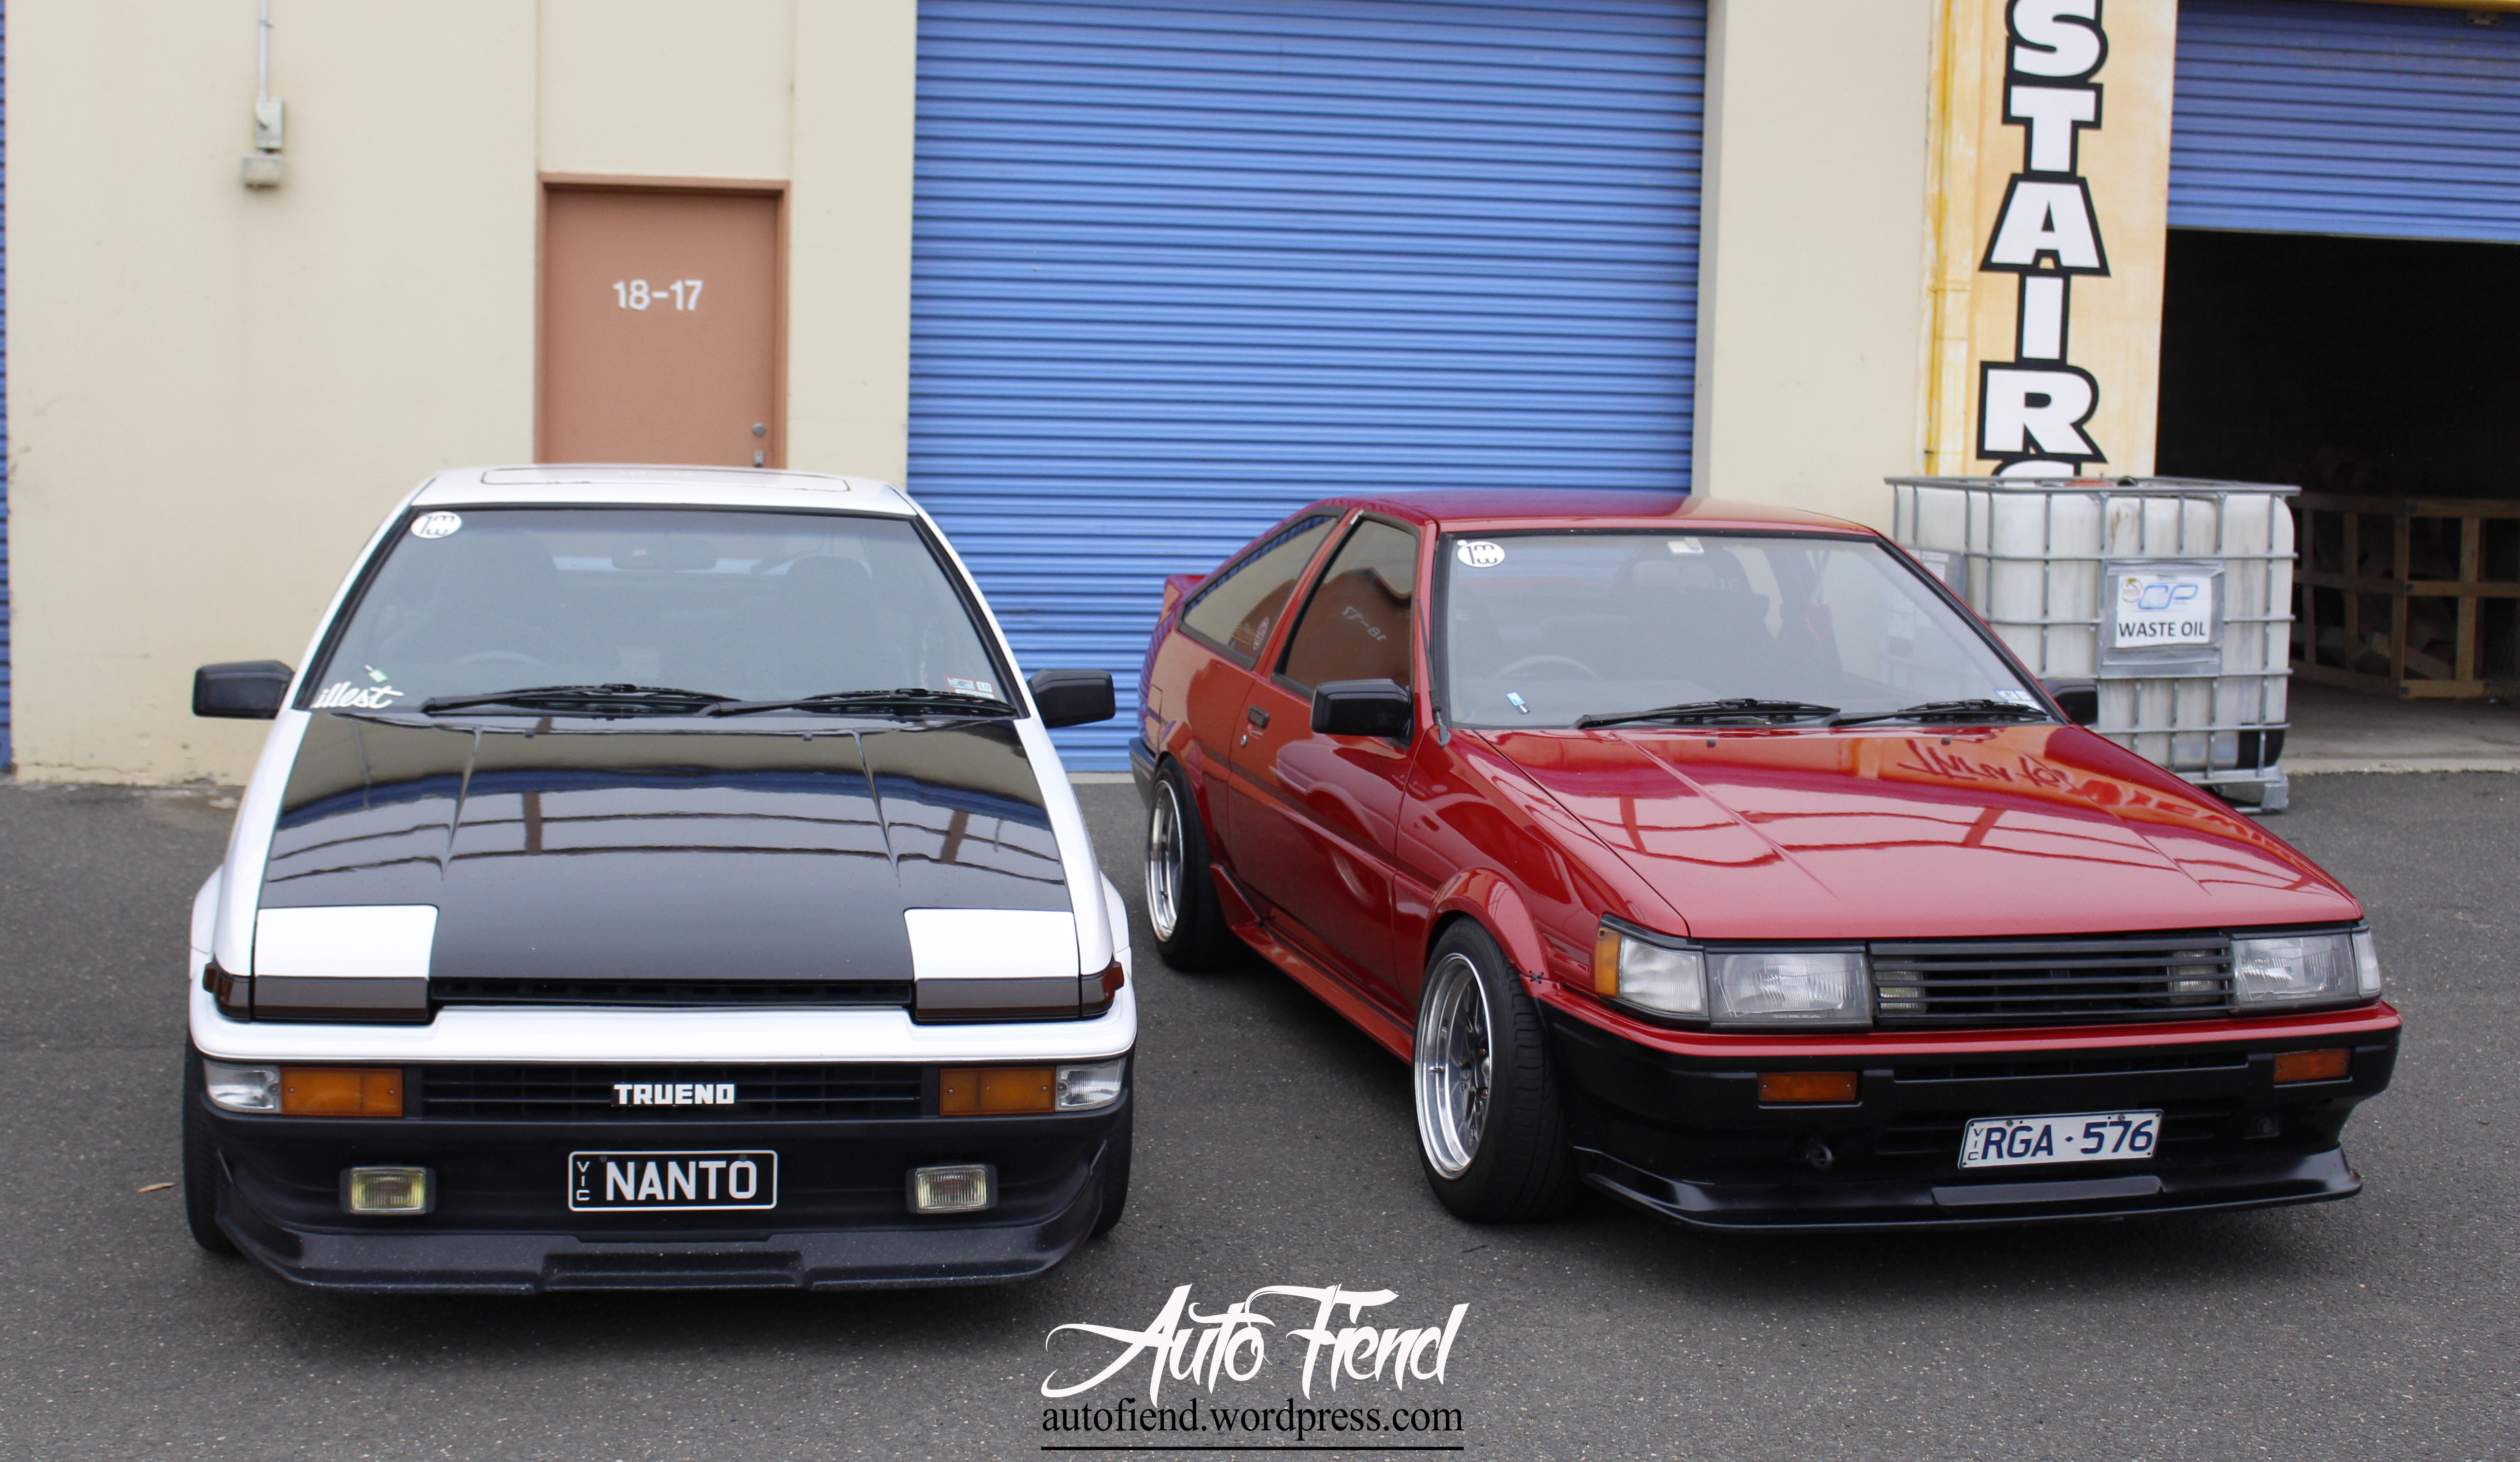 (the AE86), we have the Trueno (pronounced Toreno) on the left and Levin on...